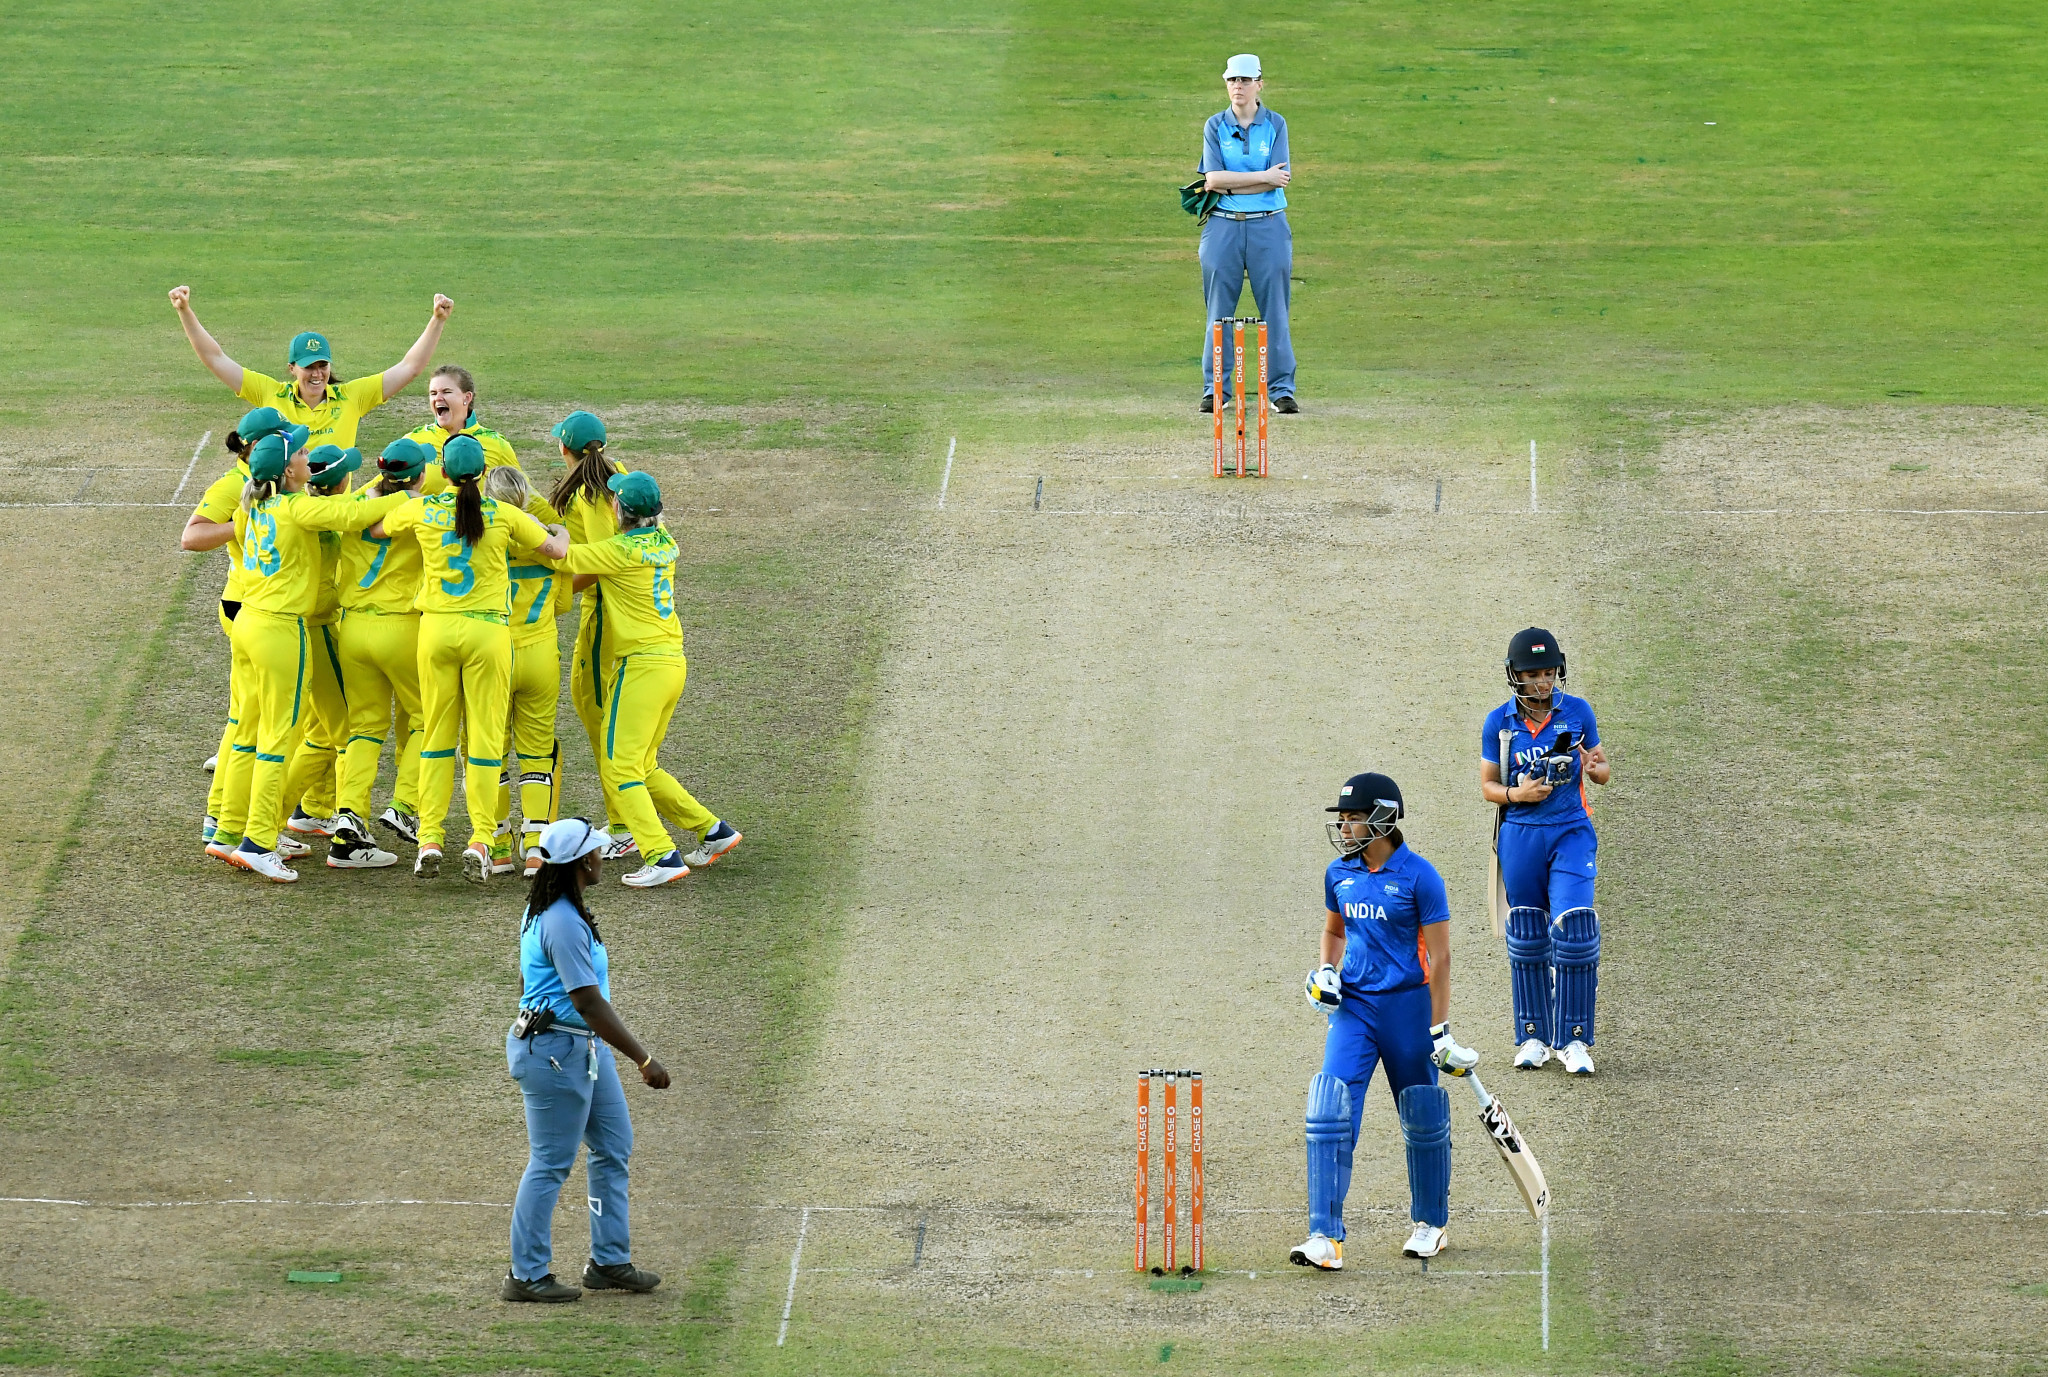 Australia beat India to claim gold in T20 cricket at Commonwealth Games